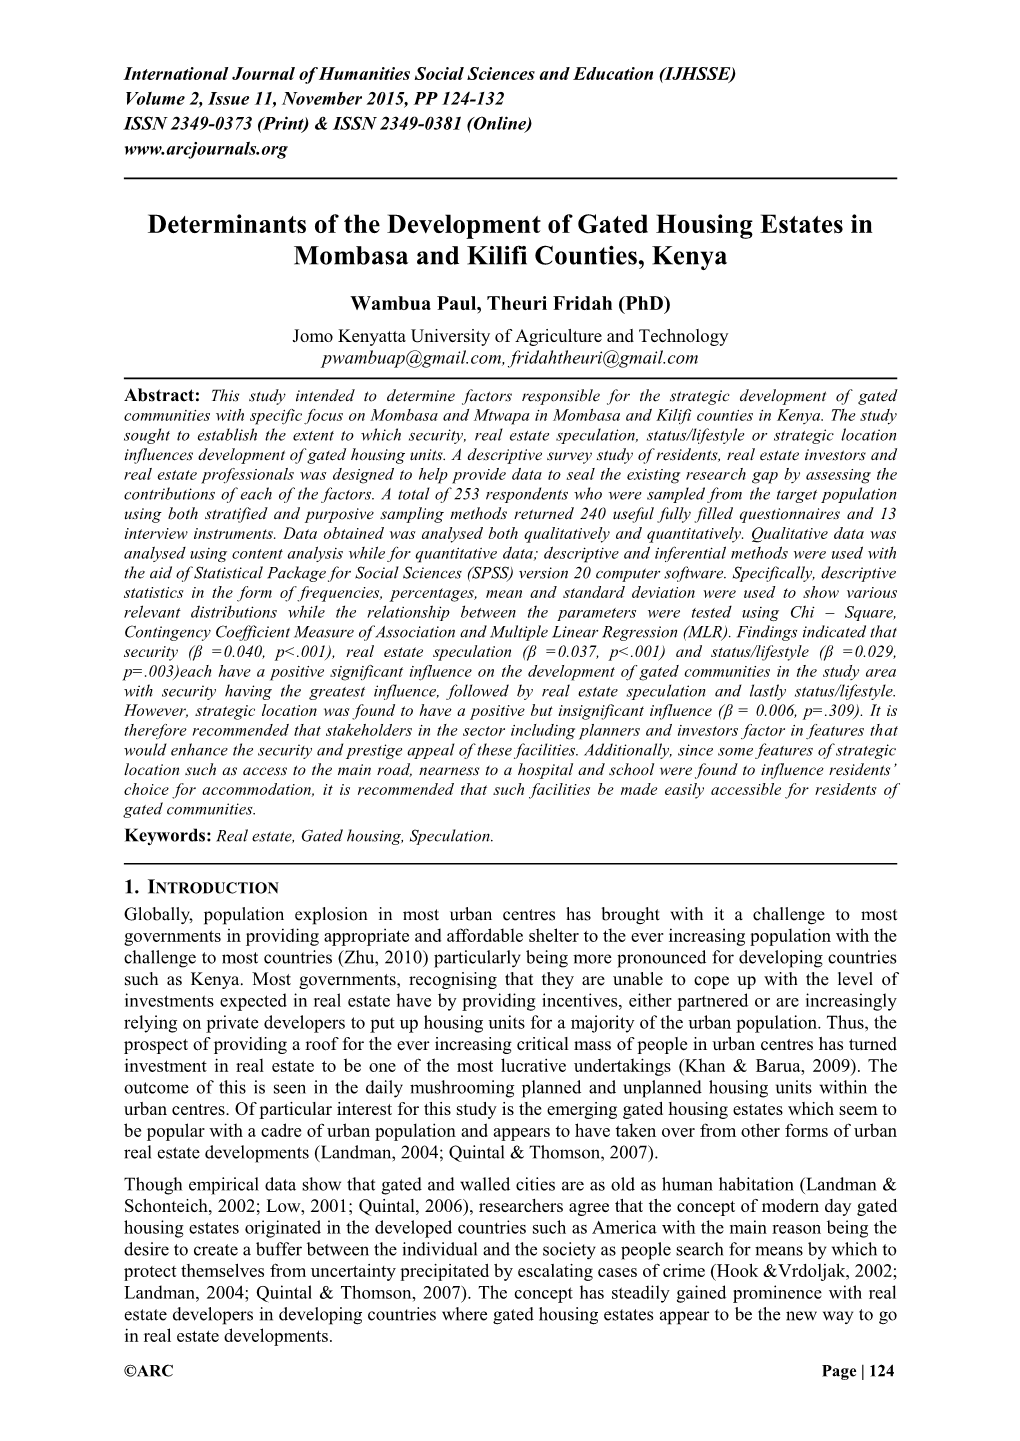 Determinants of the Development of Gated Housing Estates in Mombasa and Kilifi Counties, Kenya